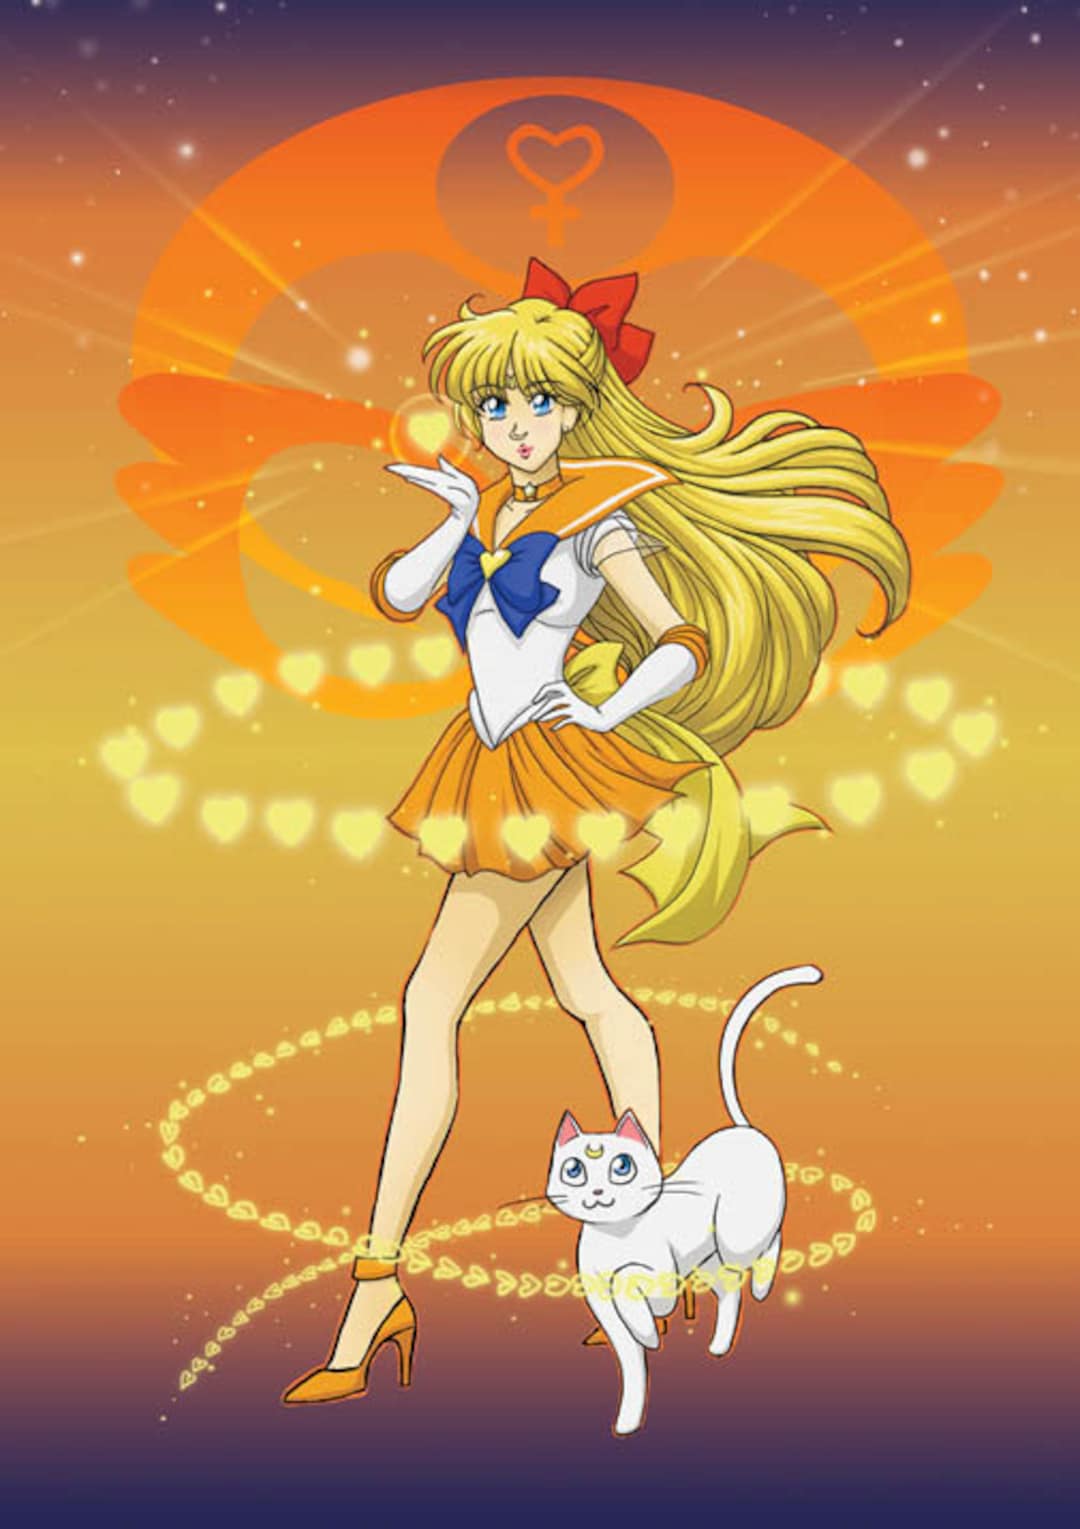 Sailor Venus is a character from the Sailor Moon series. She is a warrior and a member of the Sailor Scouts. She is also known for her strong will and determination. - Sailor Venus